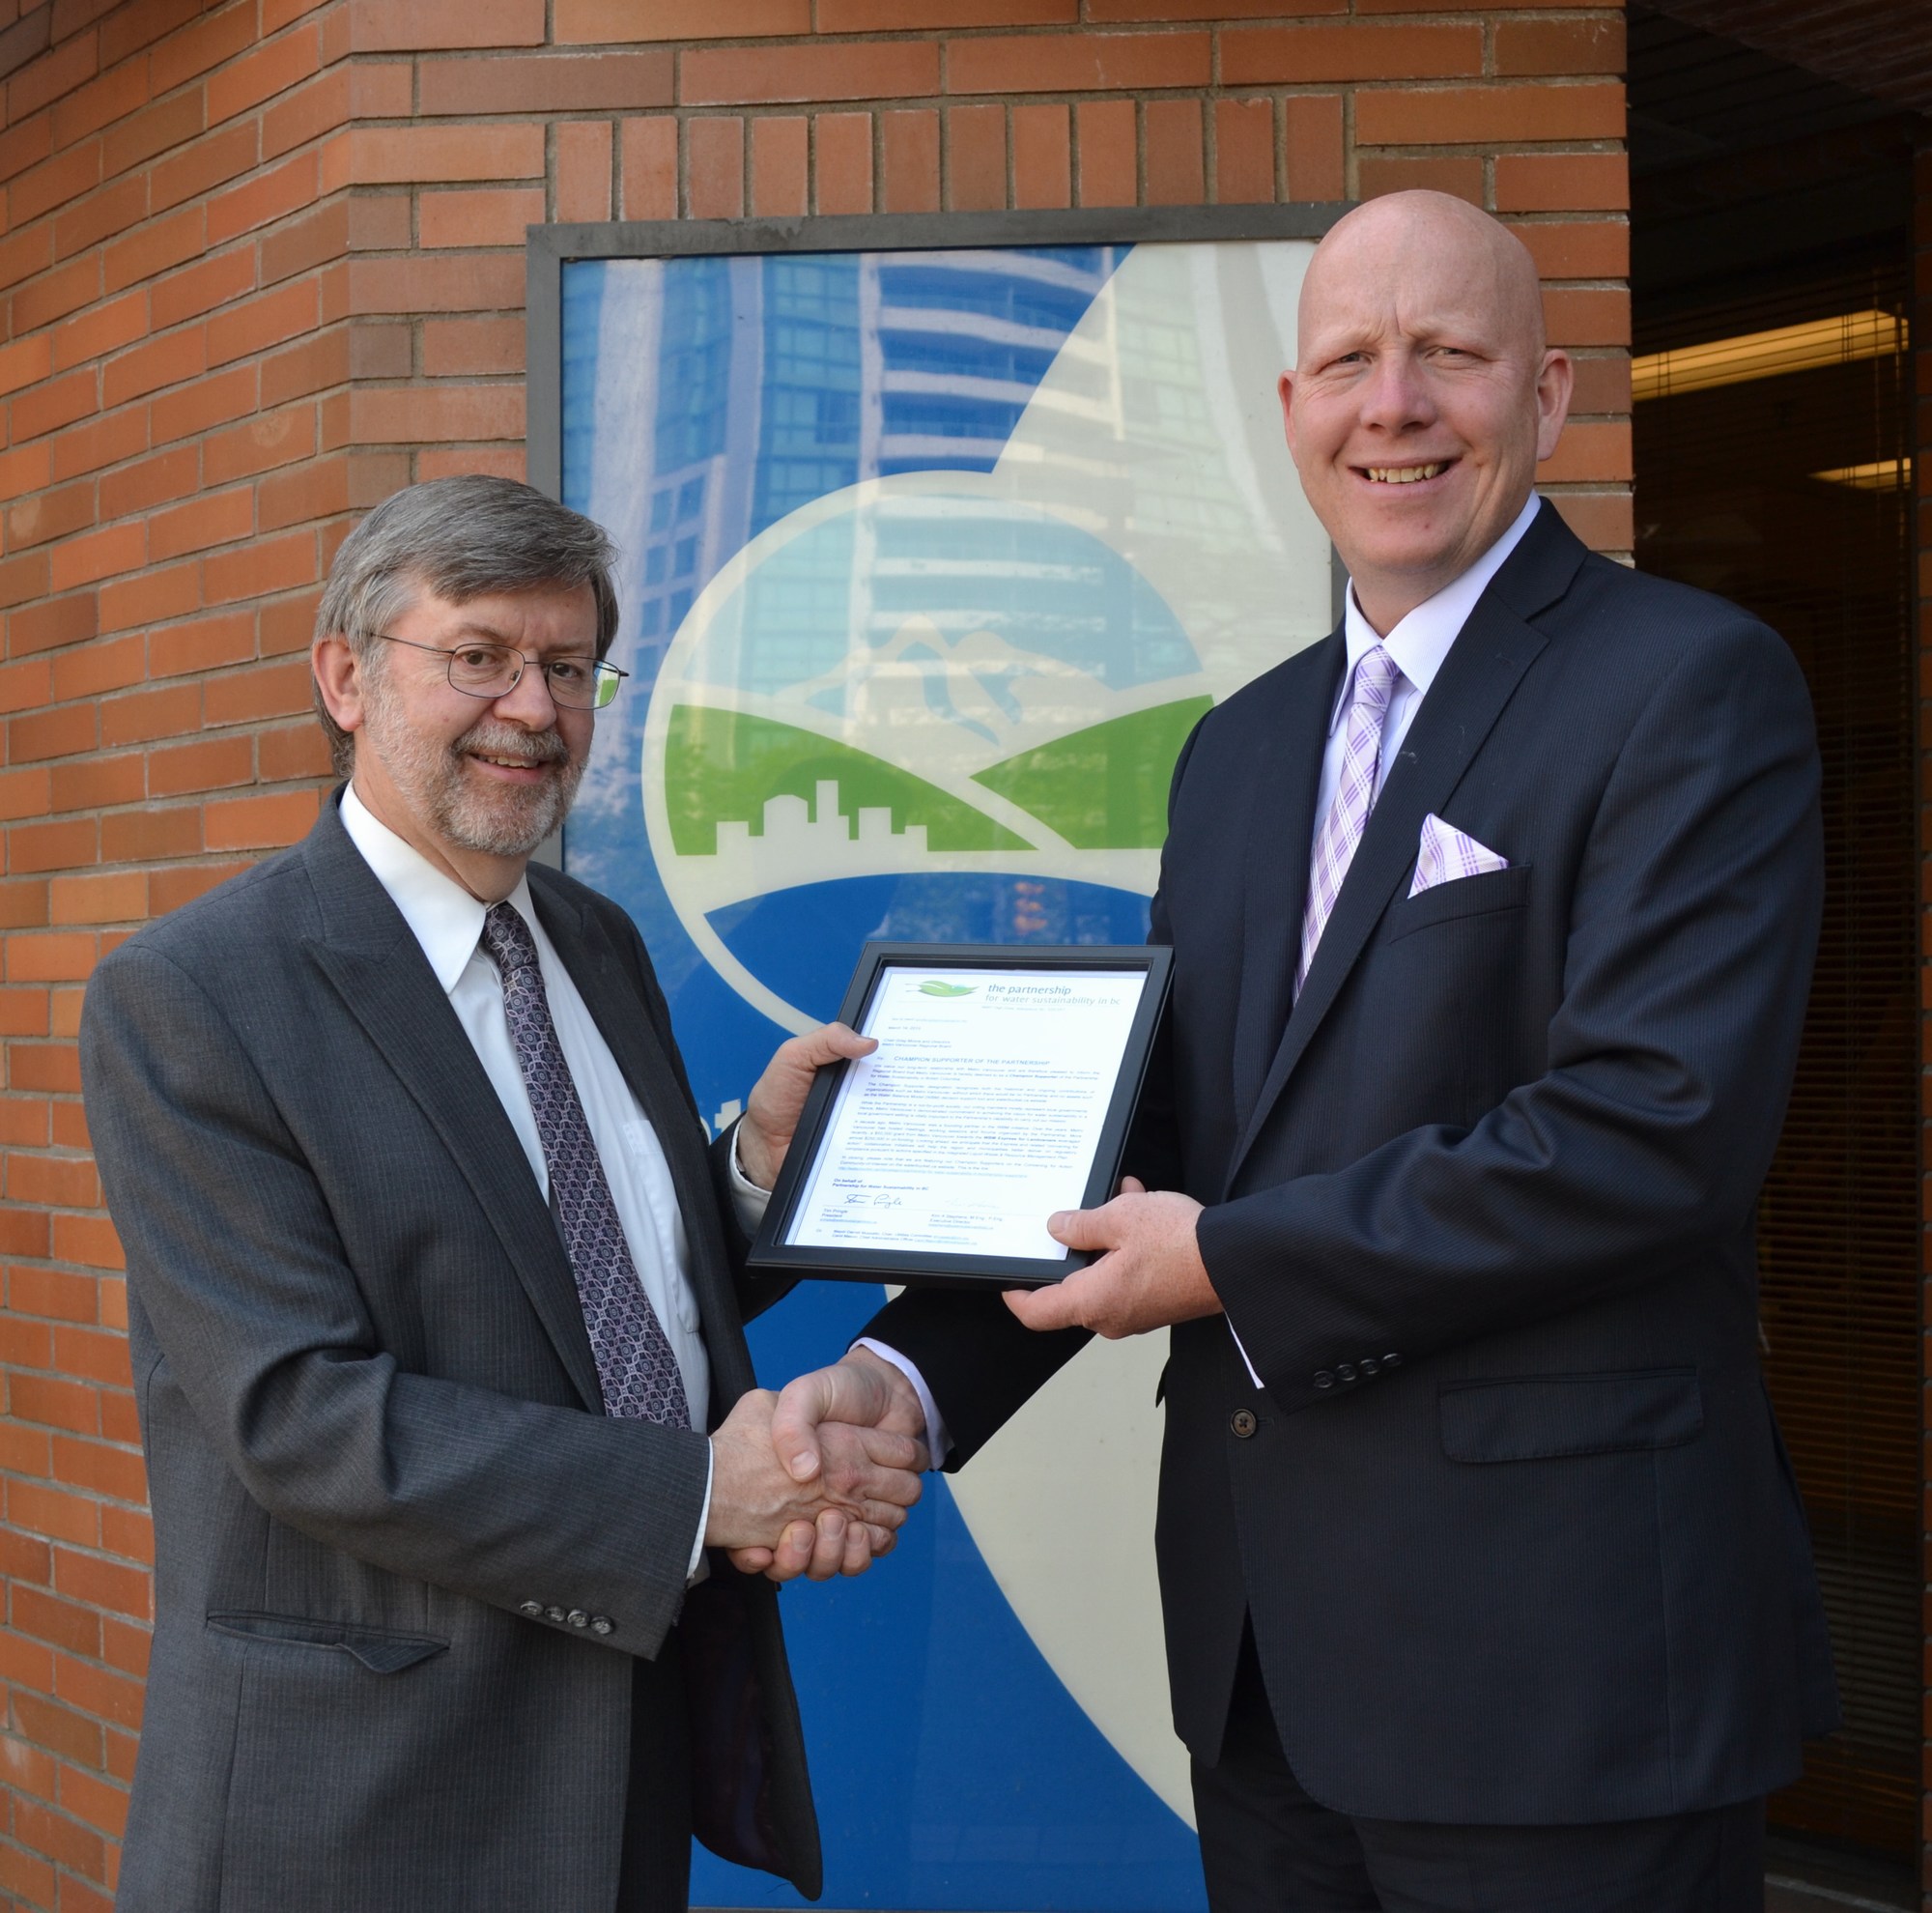 Kim Stephens (L), Executive Director of the Partnership for Water Sustainability, presents the “letter of recognition” to Metro Vancouver Chair Greg Moore (R) in May 2014